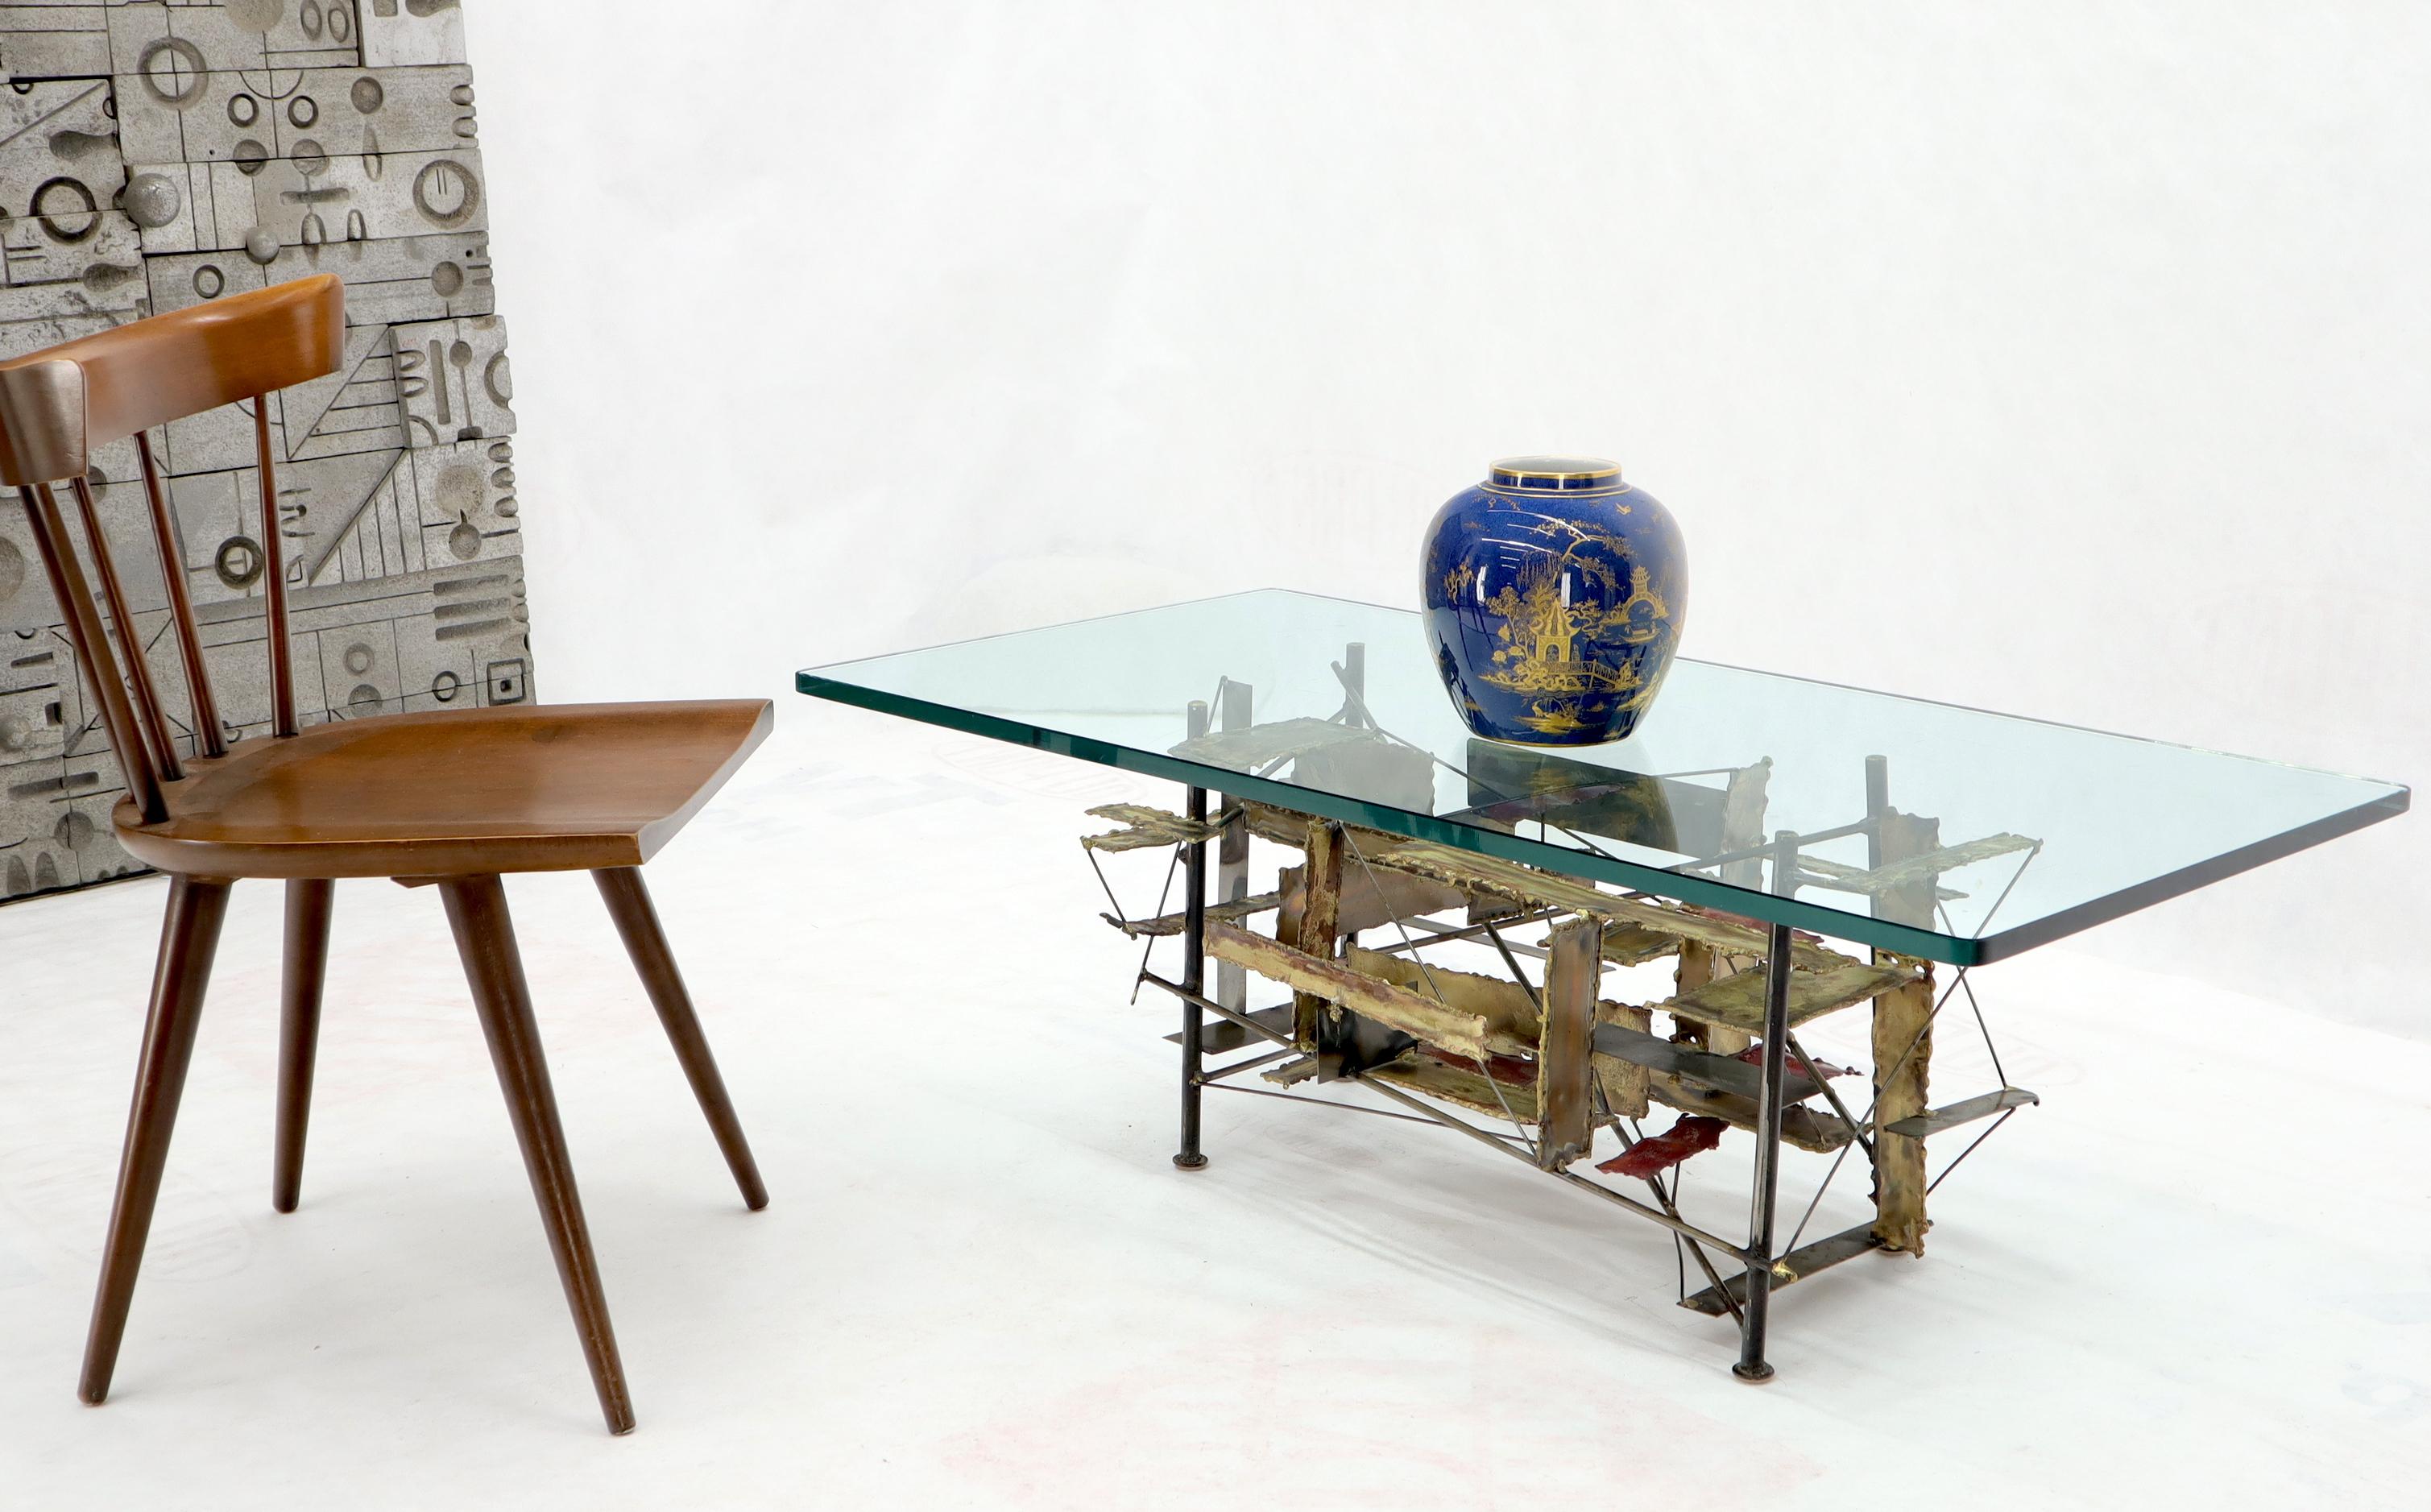 Nicer mixed metals Silas Seandel rectangular glass top mid century modern coffee table.